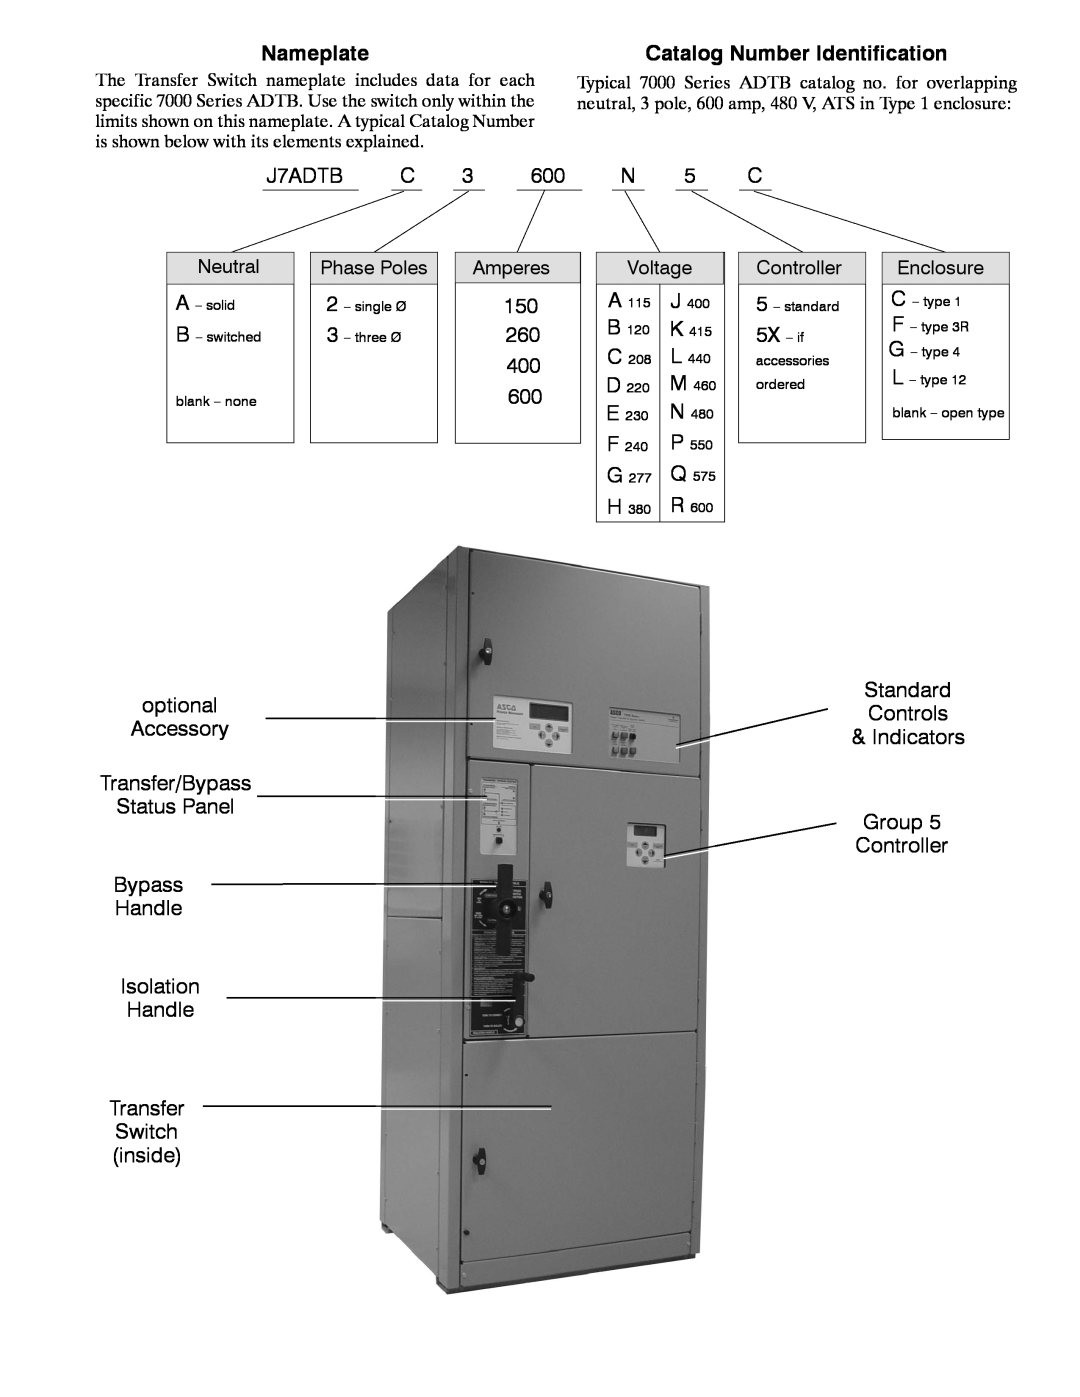 Emerson 7ADTB Nameplate, Catalog Number Identification, Neutral, Phase Poles, Amperes, Voltage, Controller, Enclosure 